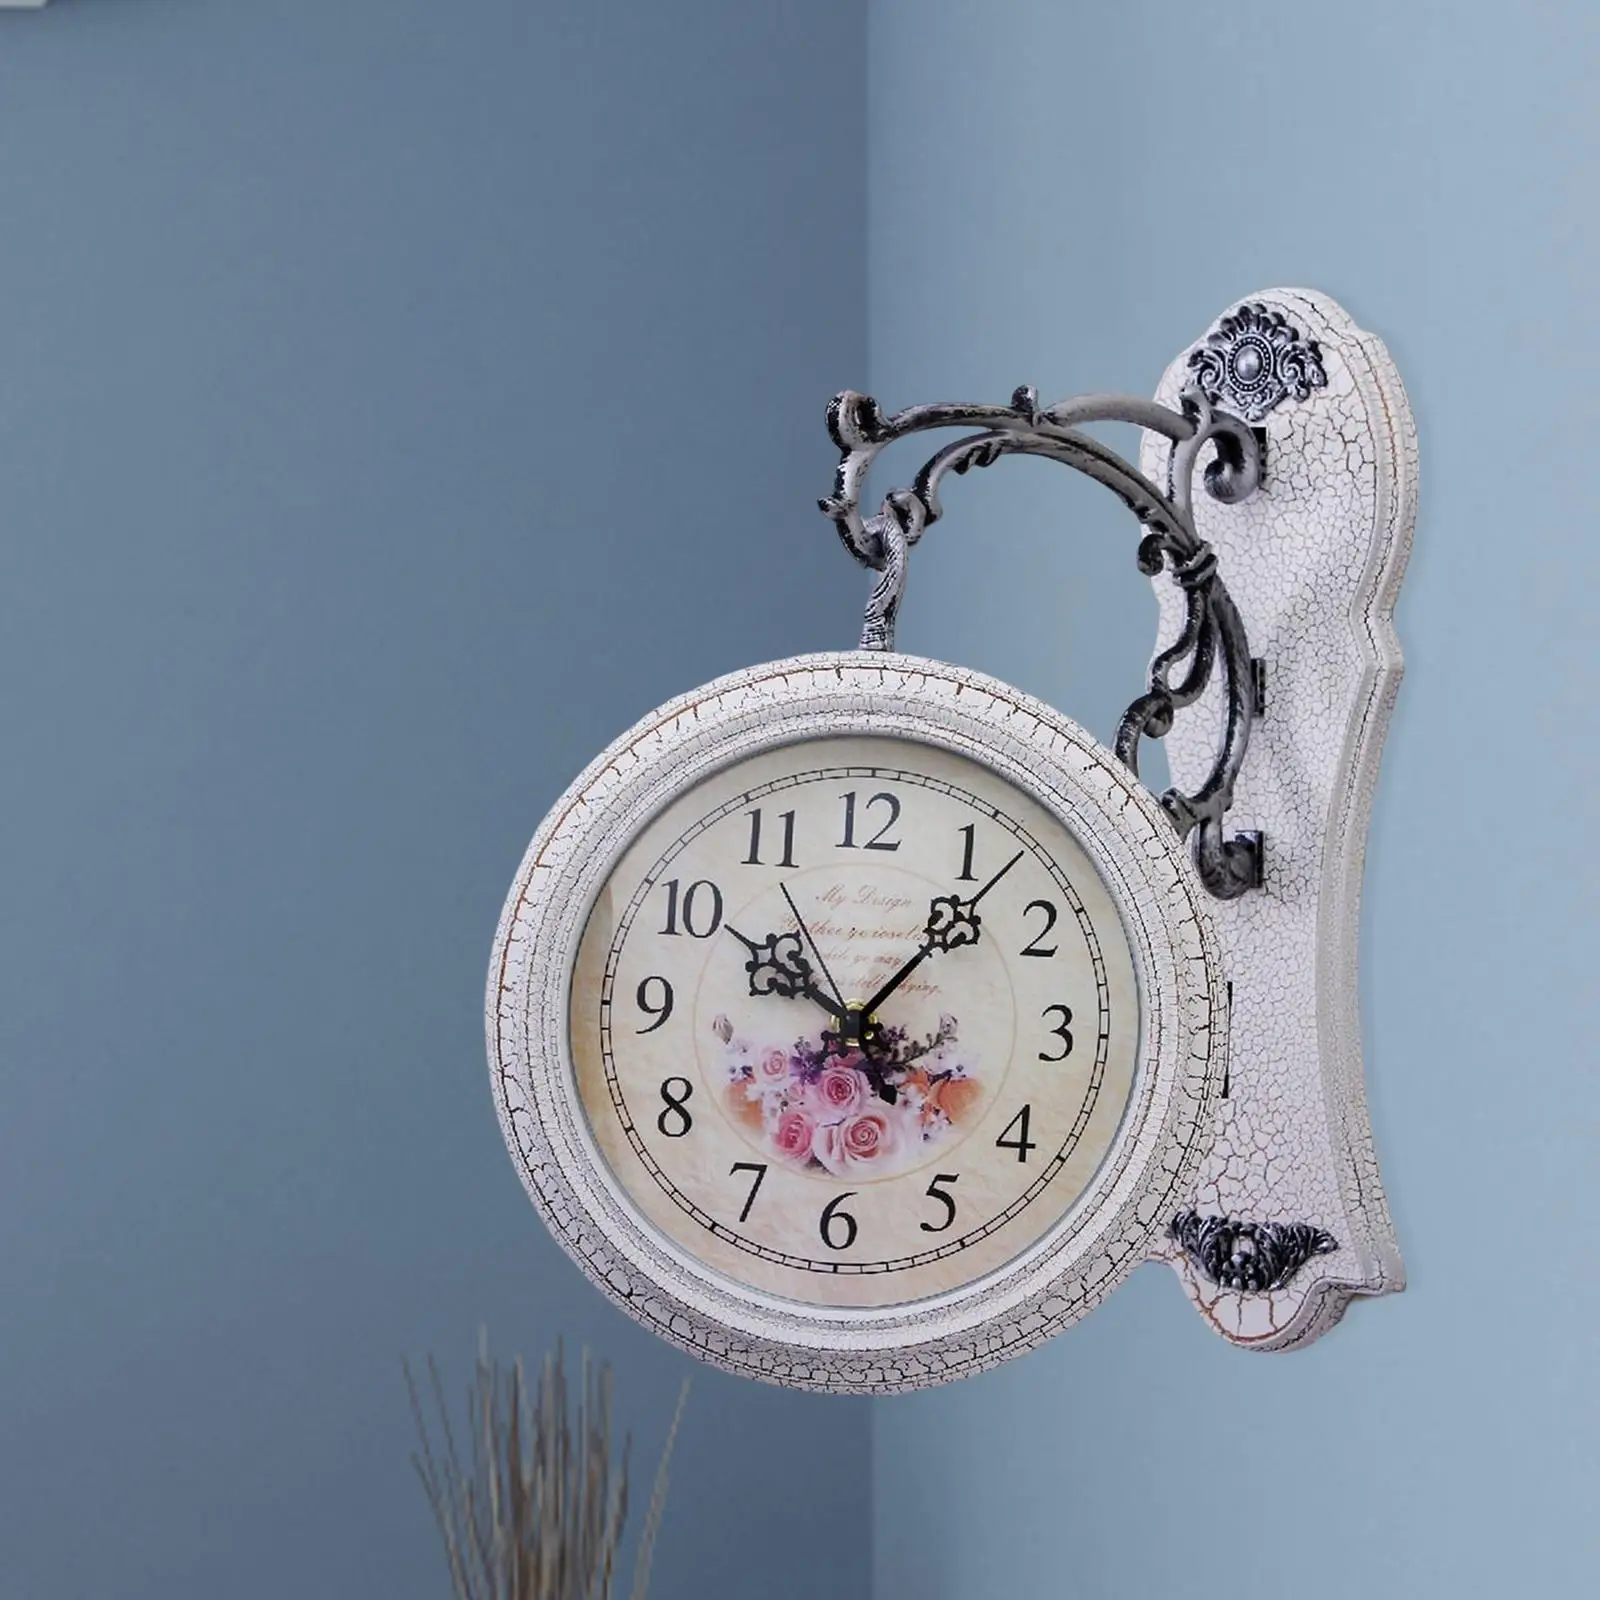  Double Sided Station Wall Clock Antique Decorative Double Faced Wall Clock Wall Mounted Train Railway  Clock, White